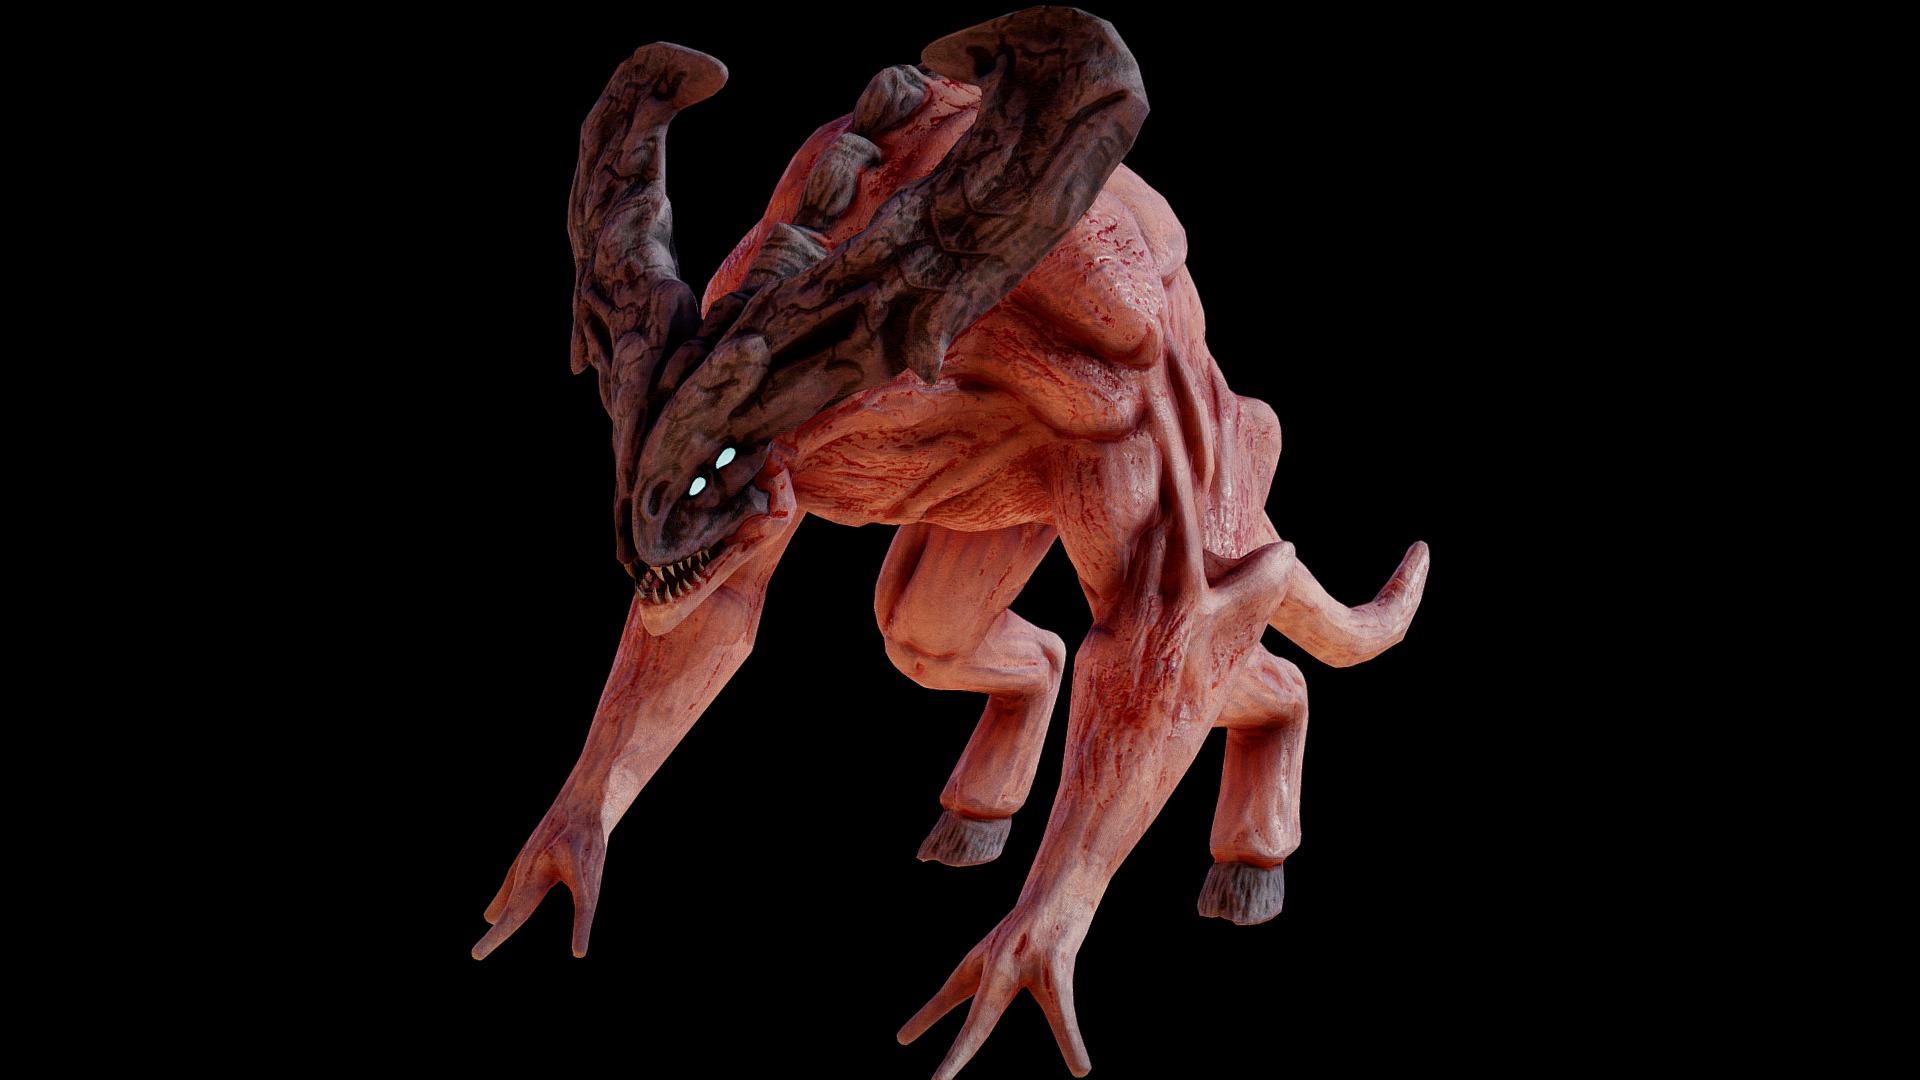 3D model monster - This is a 3D model of the monster. The 3D model is about a close-up of a human body.